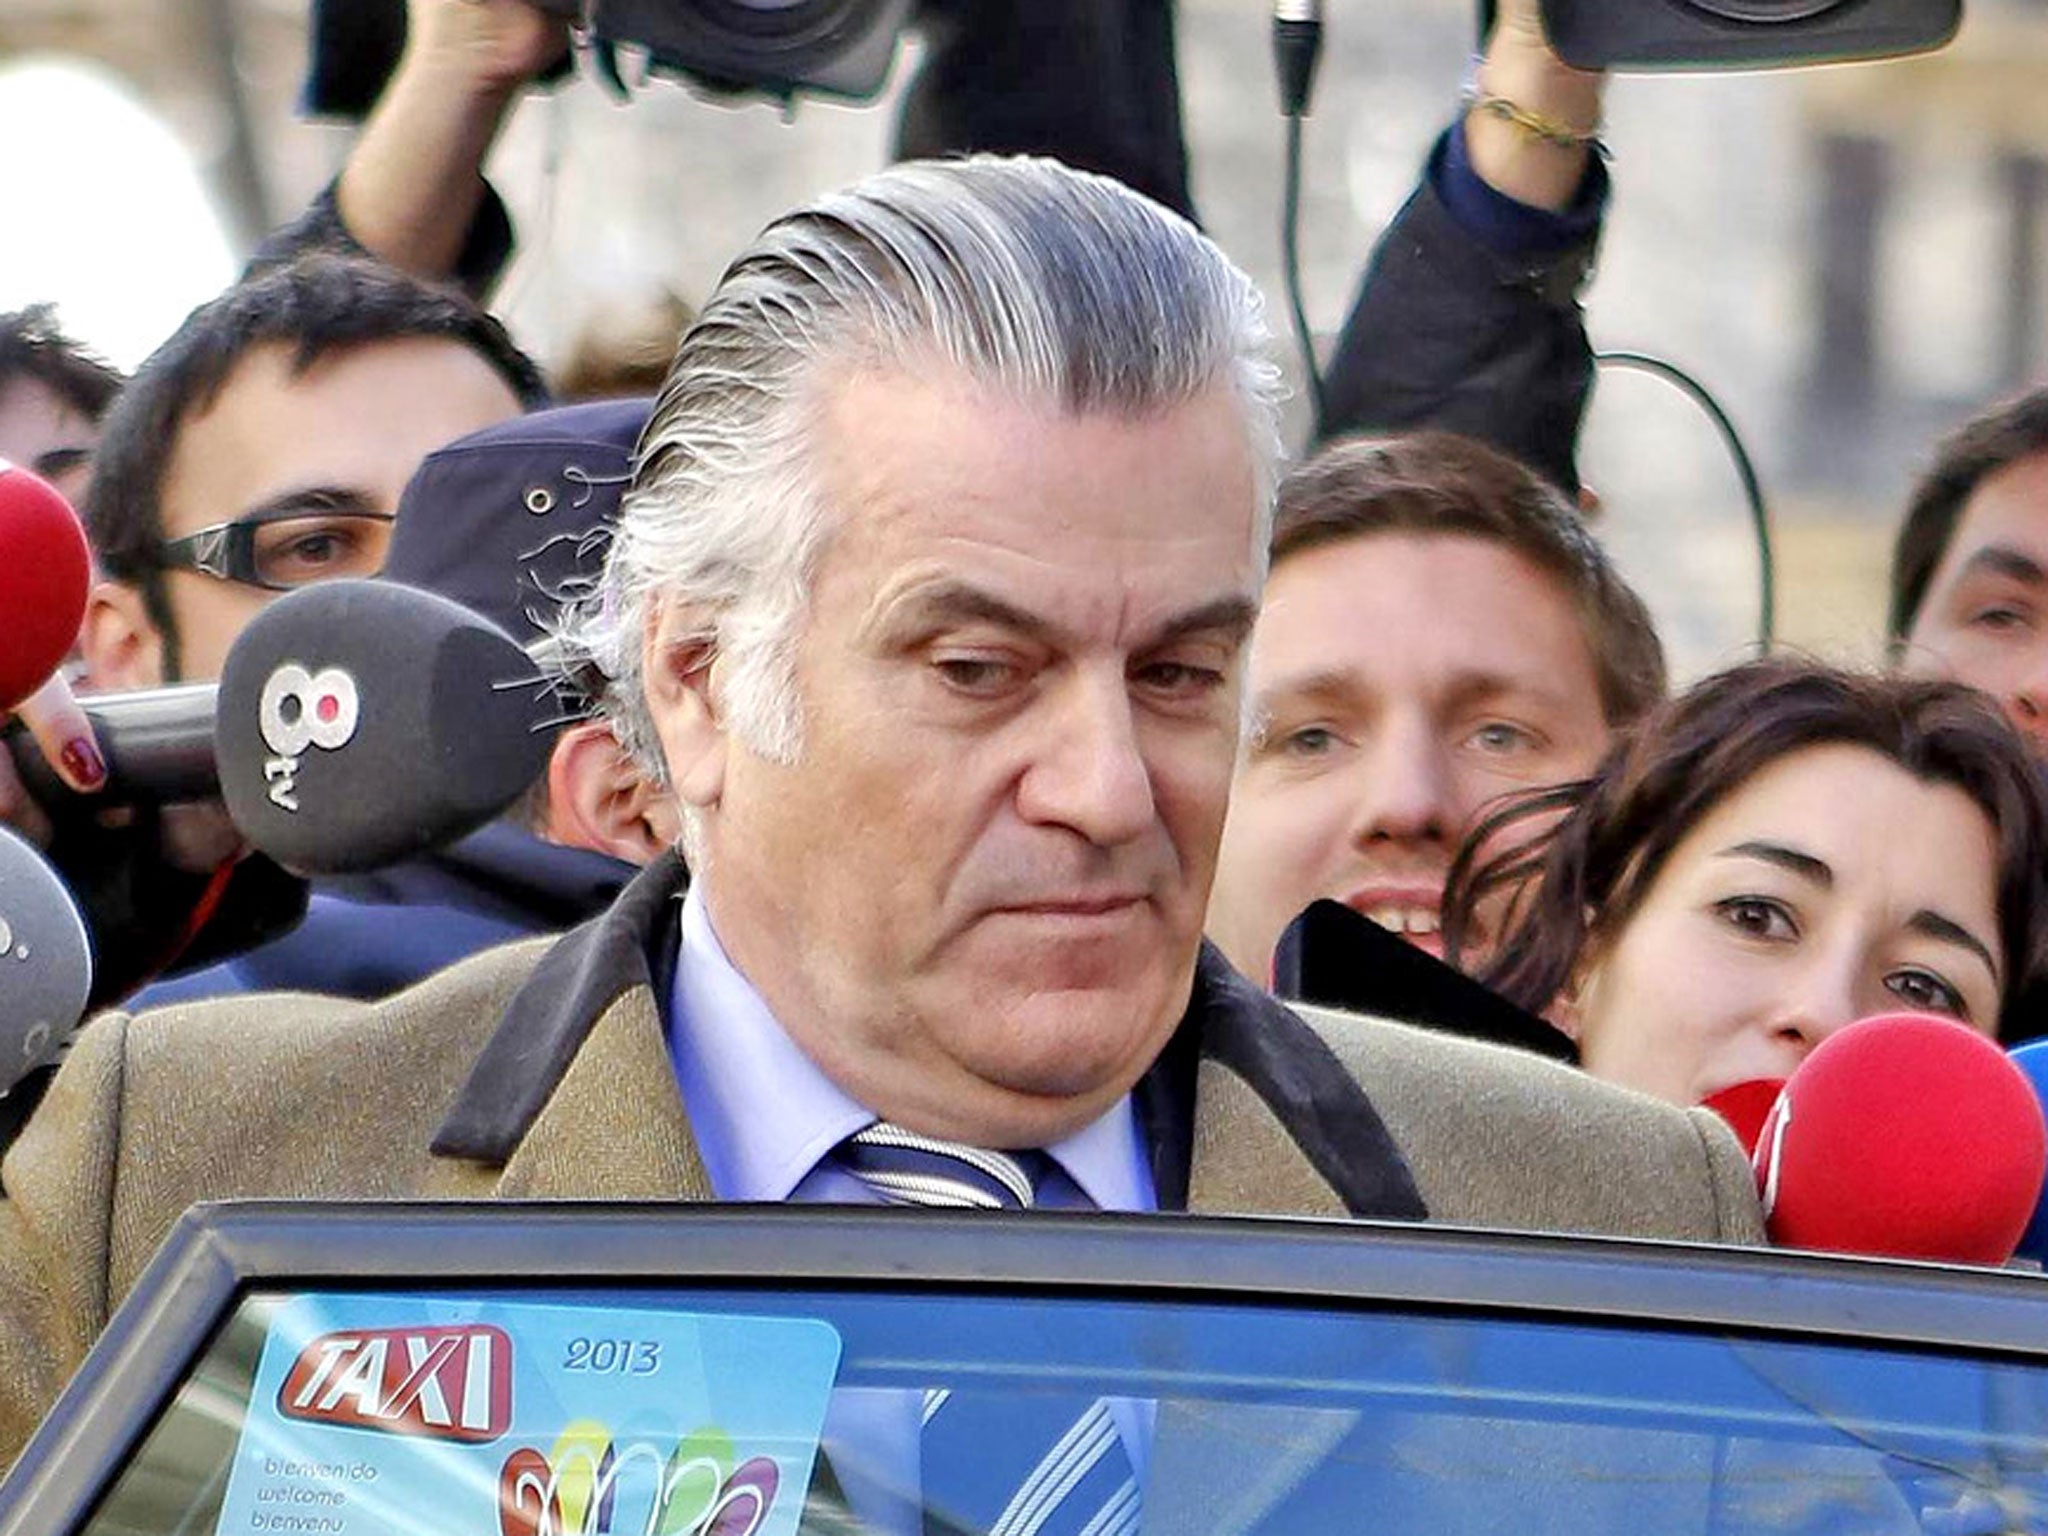 Luis Bárcenas is accused by Spanish authorities of abusing his position to secure bribes, evade taxes and launder money